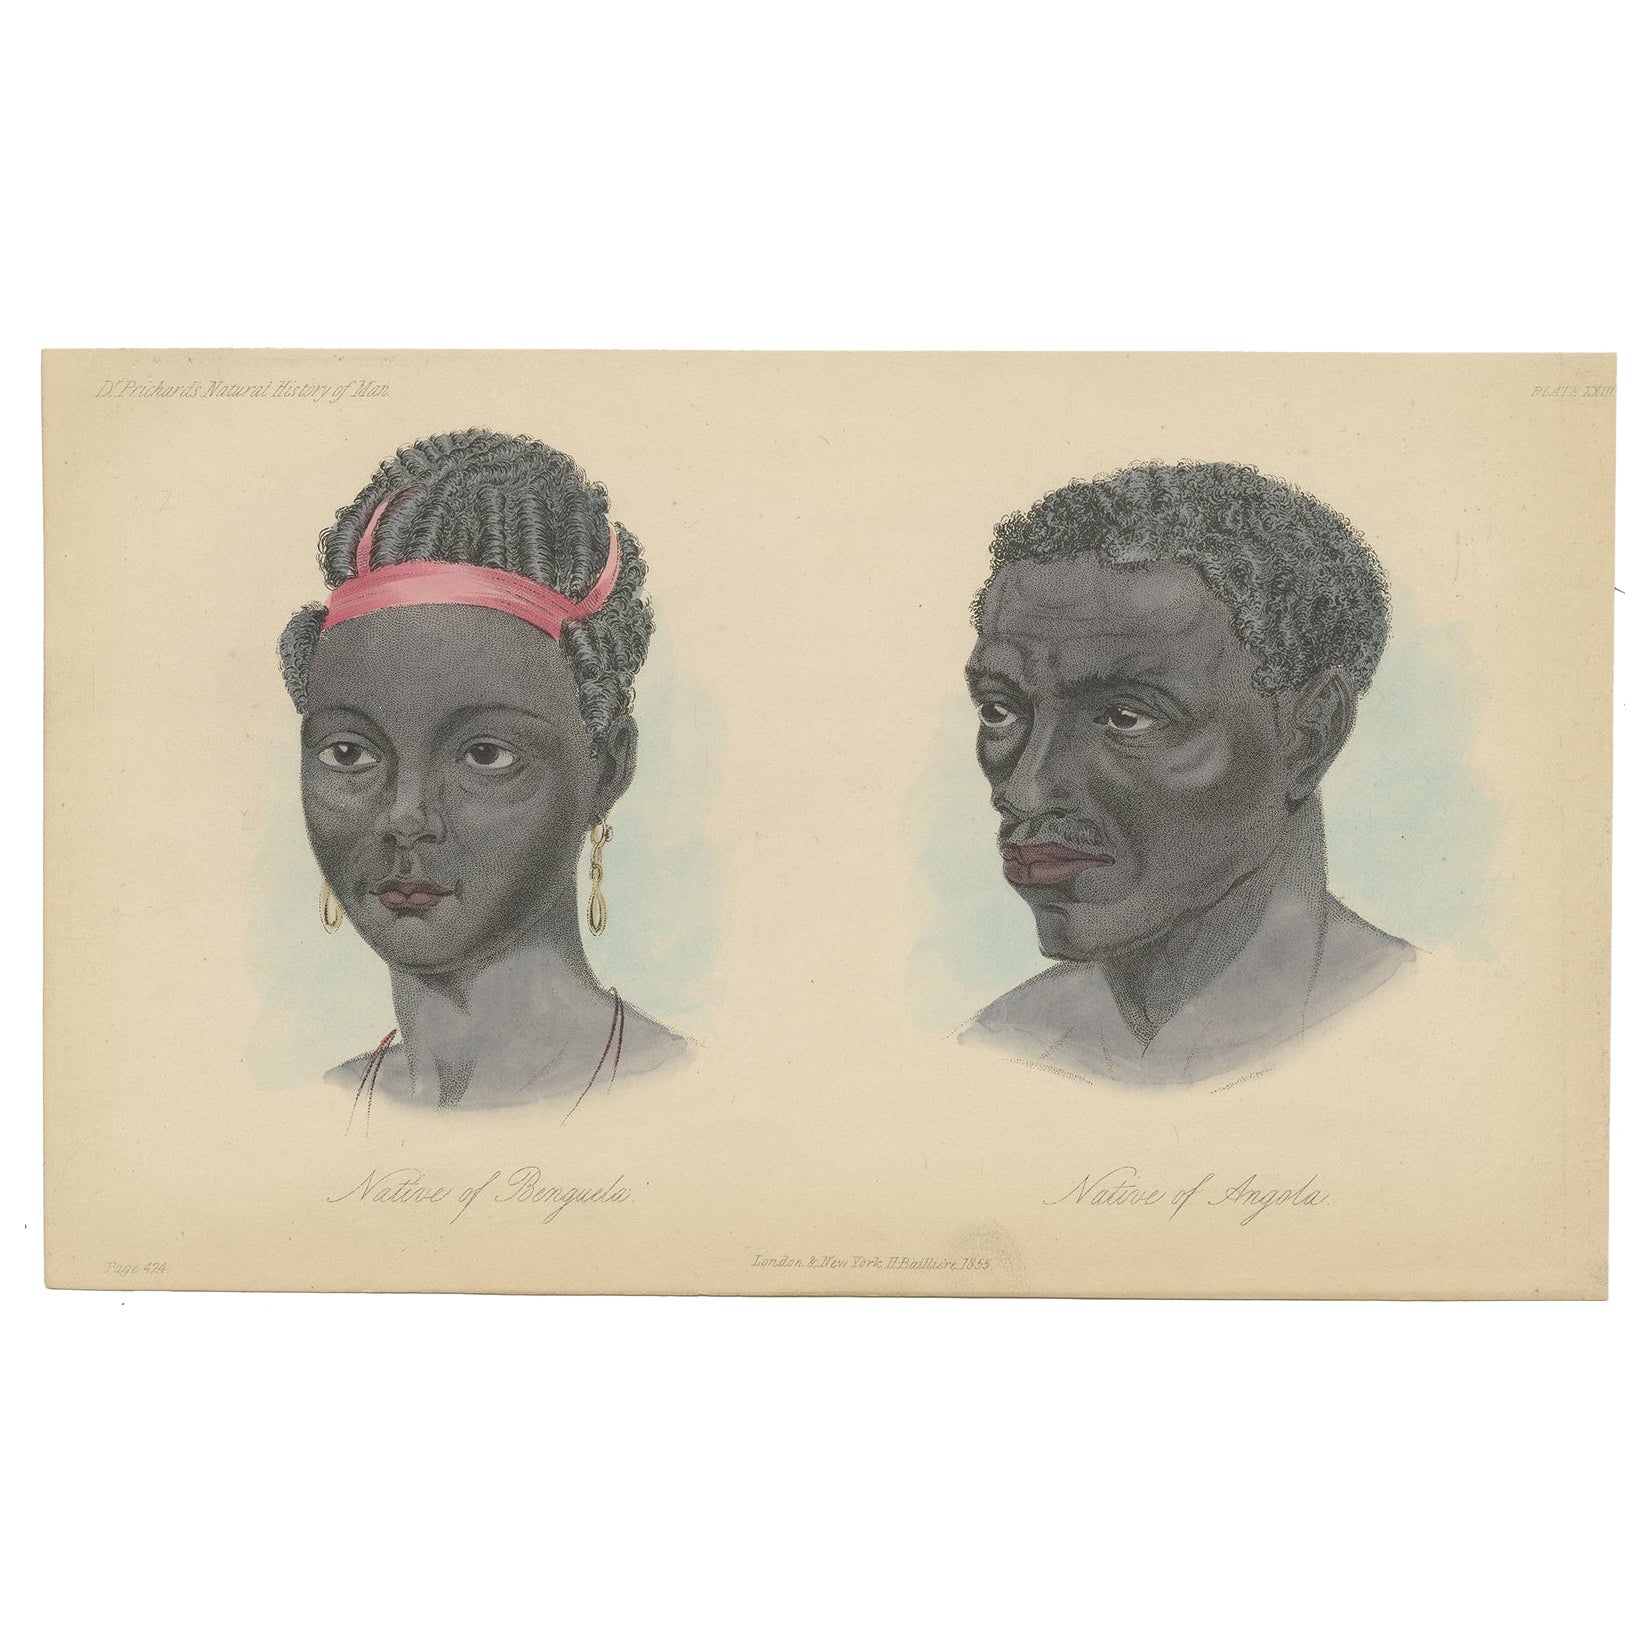 Antique Print of a Native of Benguela City and a Native of Angola, Africa, 1855